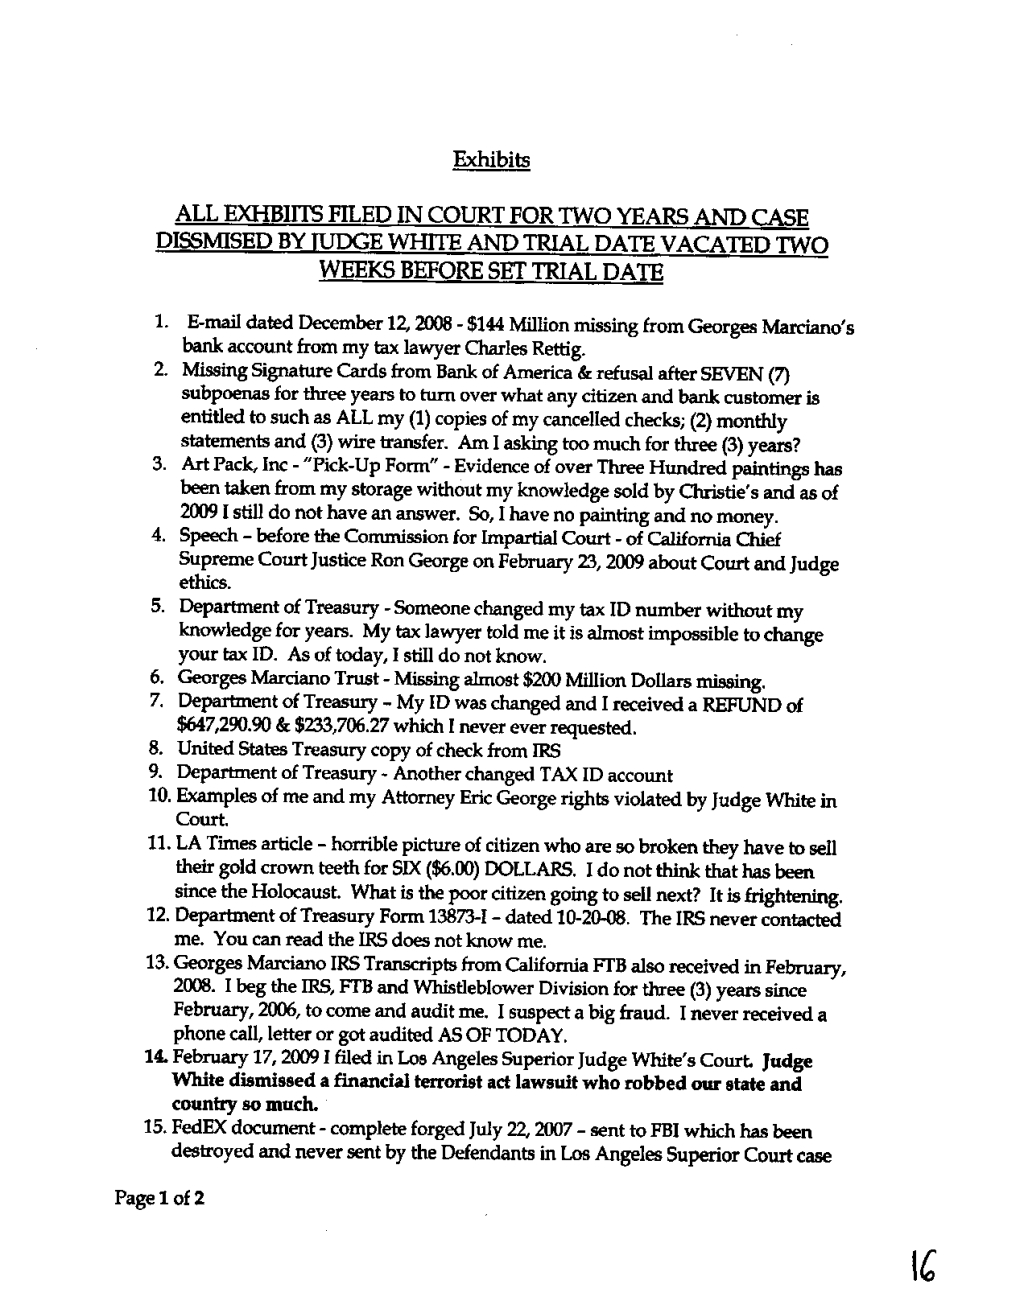 full complaint judge white for federal with exhibits_1_page16